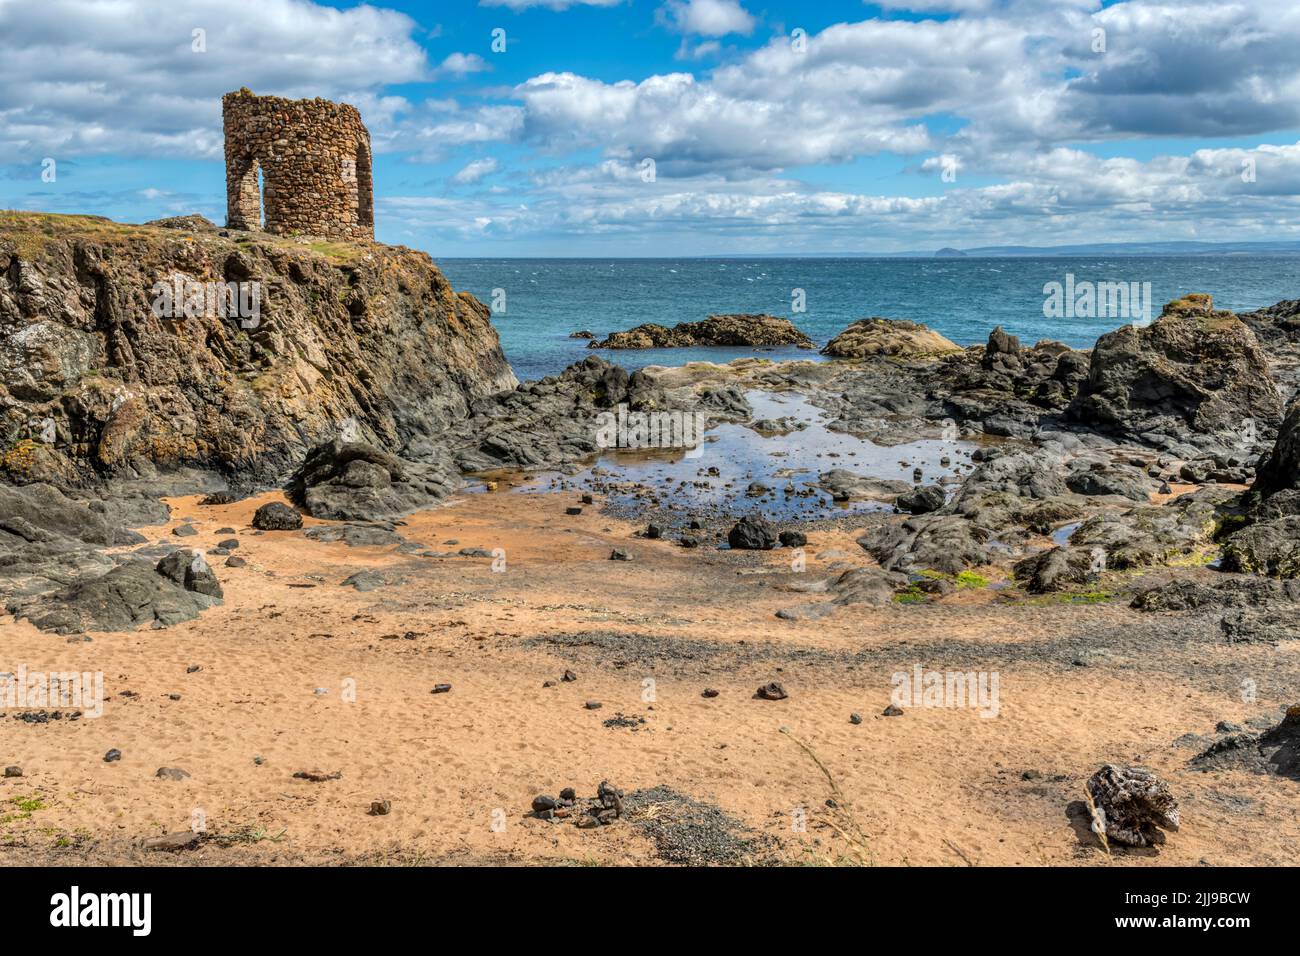 Lady's Tower at Elie Ness in the East Neuk of Fife, Scotland, was built in the late-18th century as a dressing room for Lady Anstruther when bathing. Stock Photo